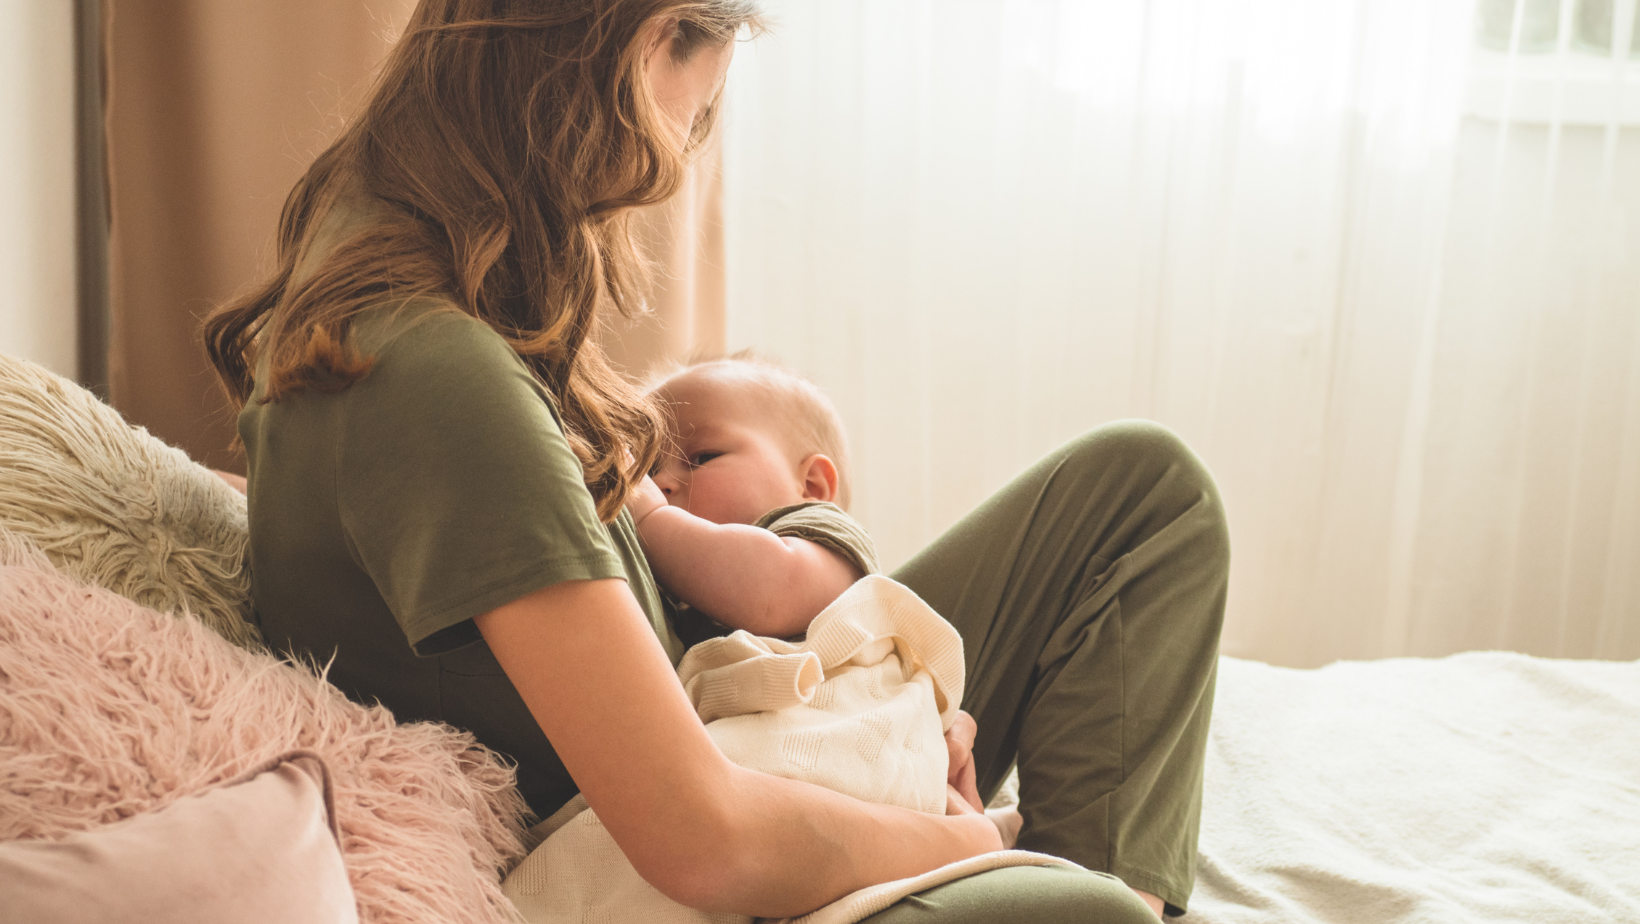 things new moms need for themselves